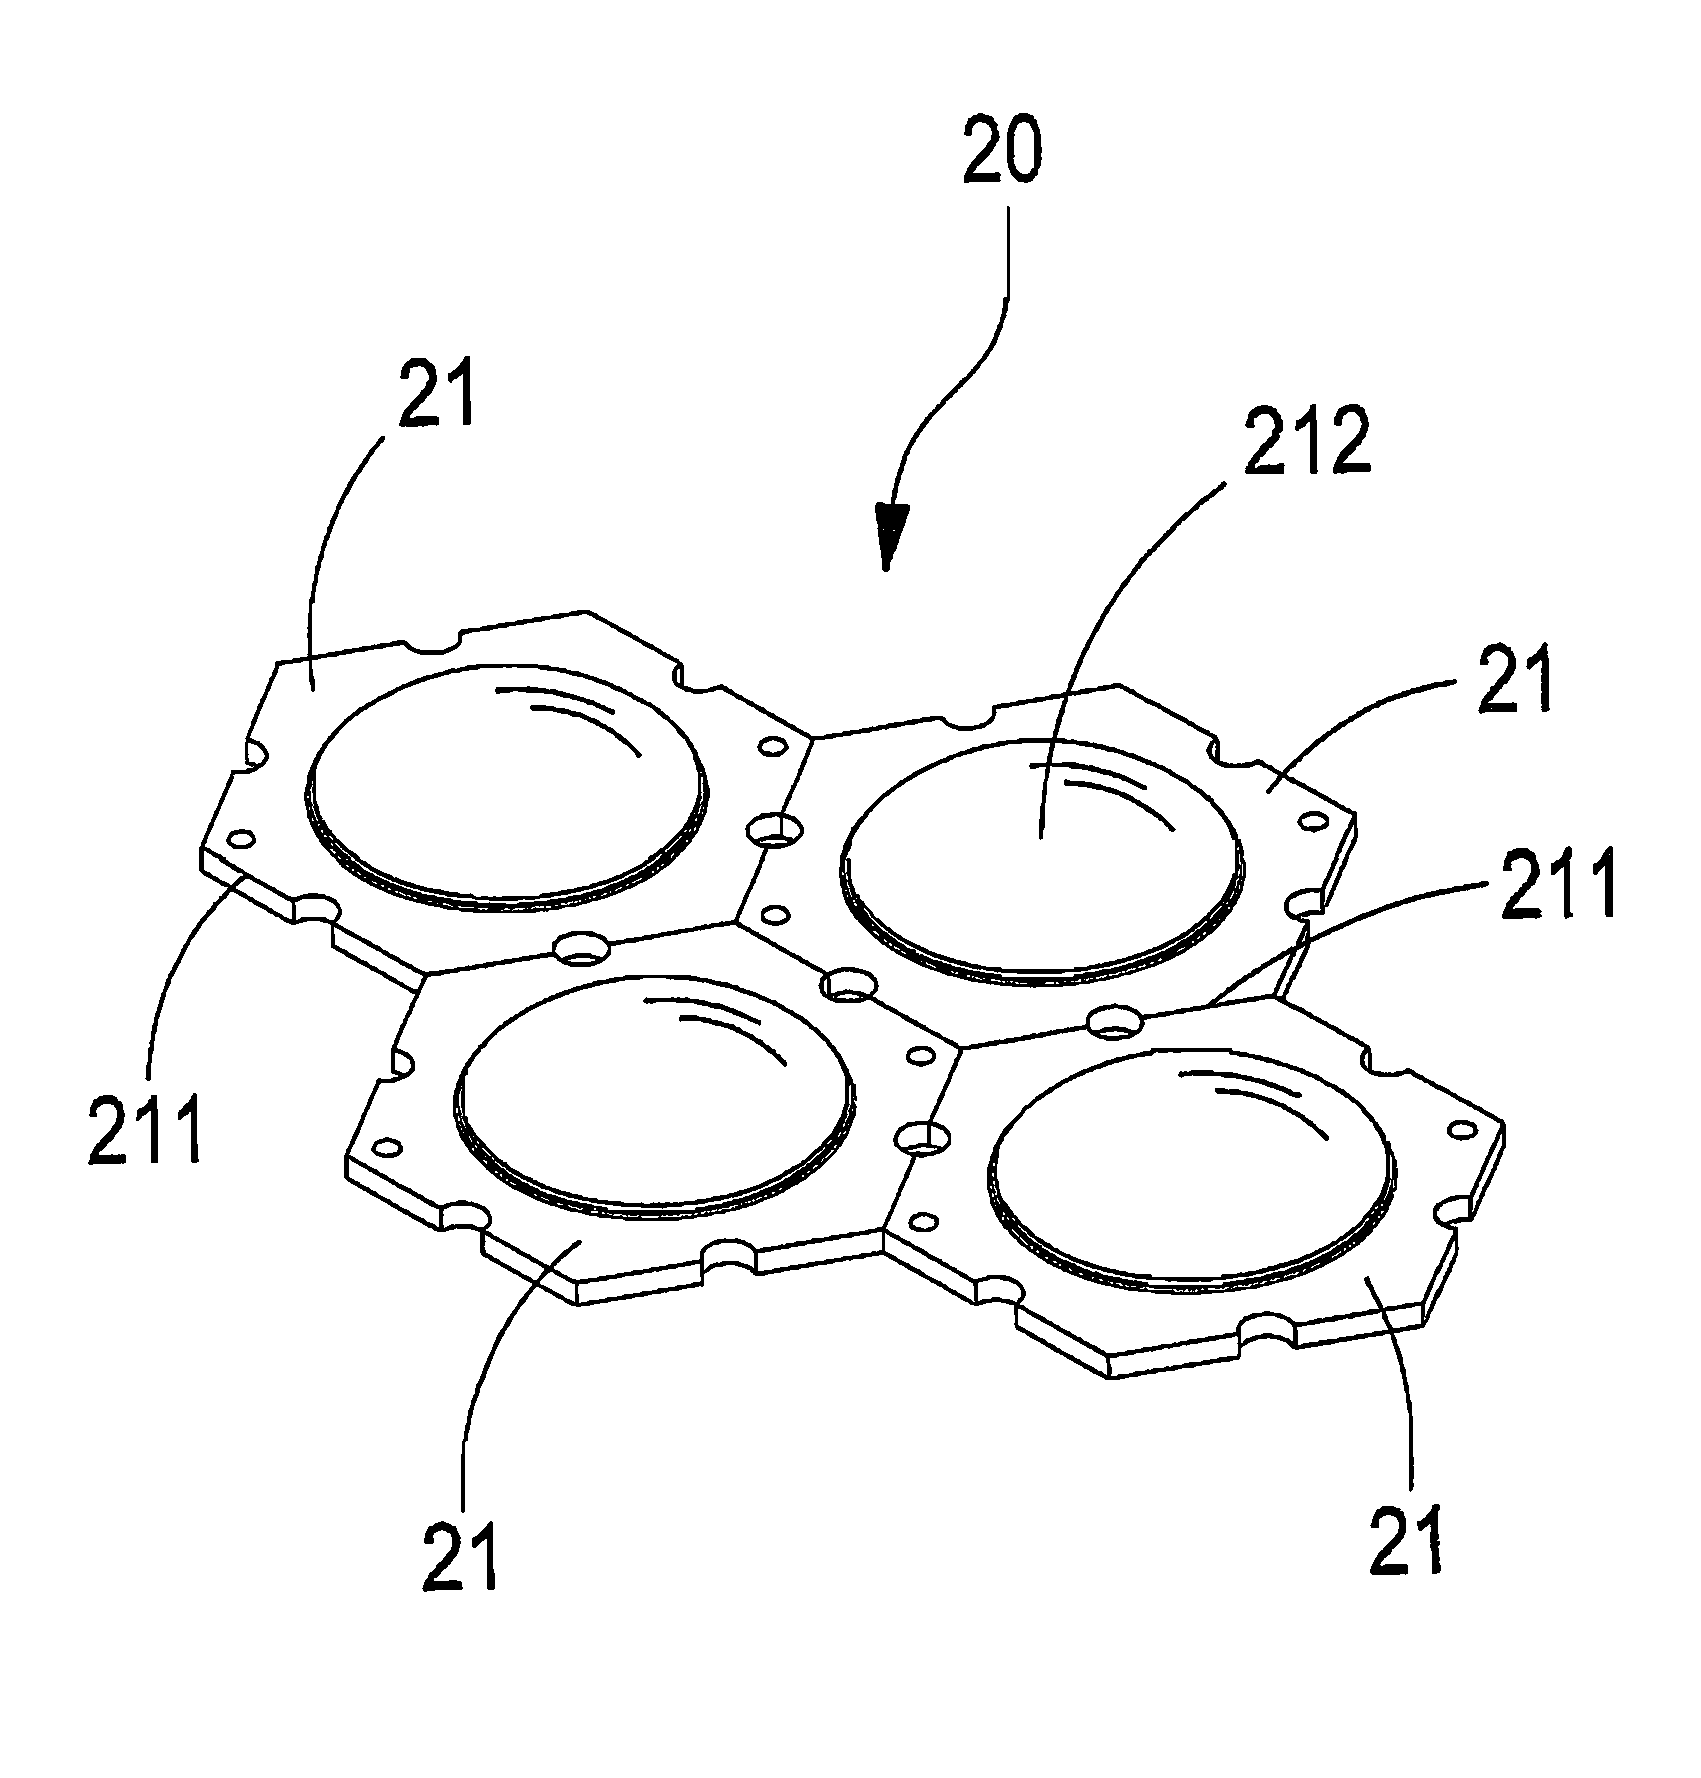 Composite structure for polygonal light-emitting diode